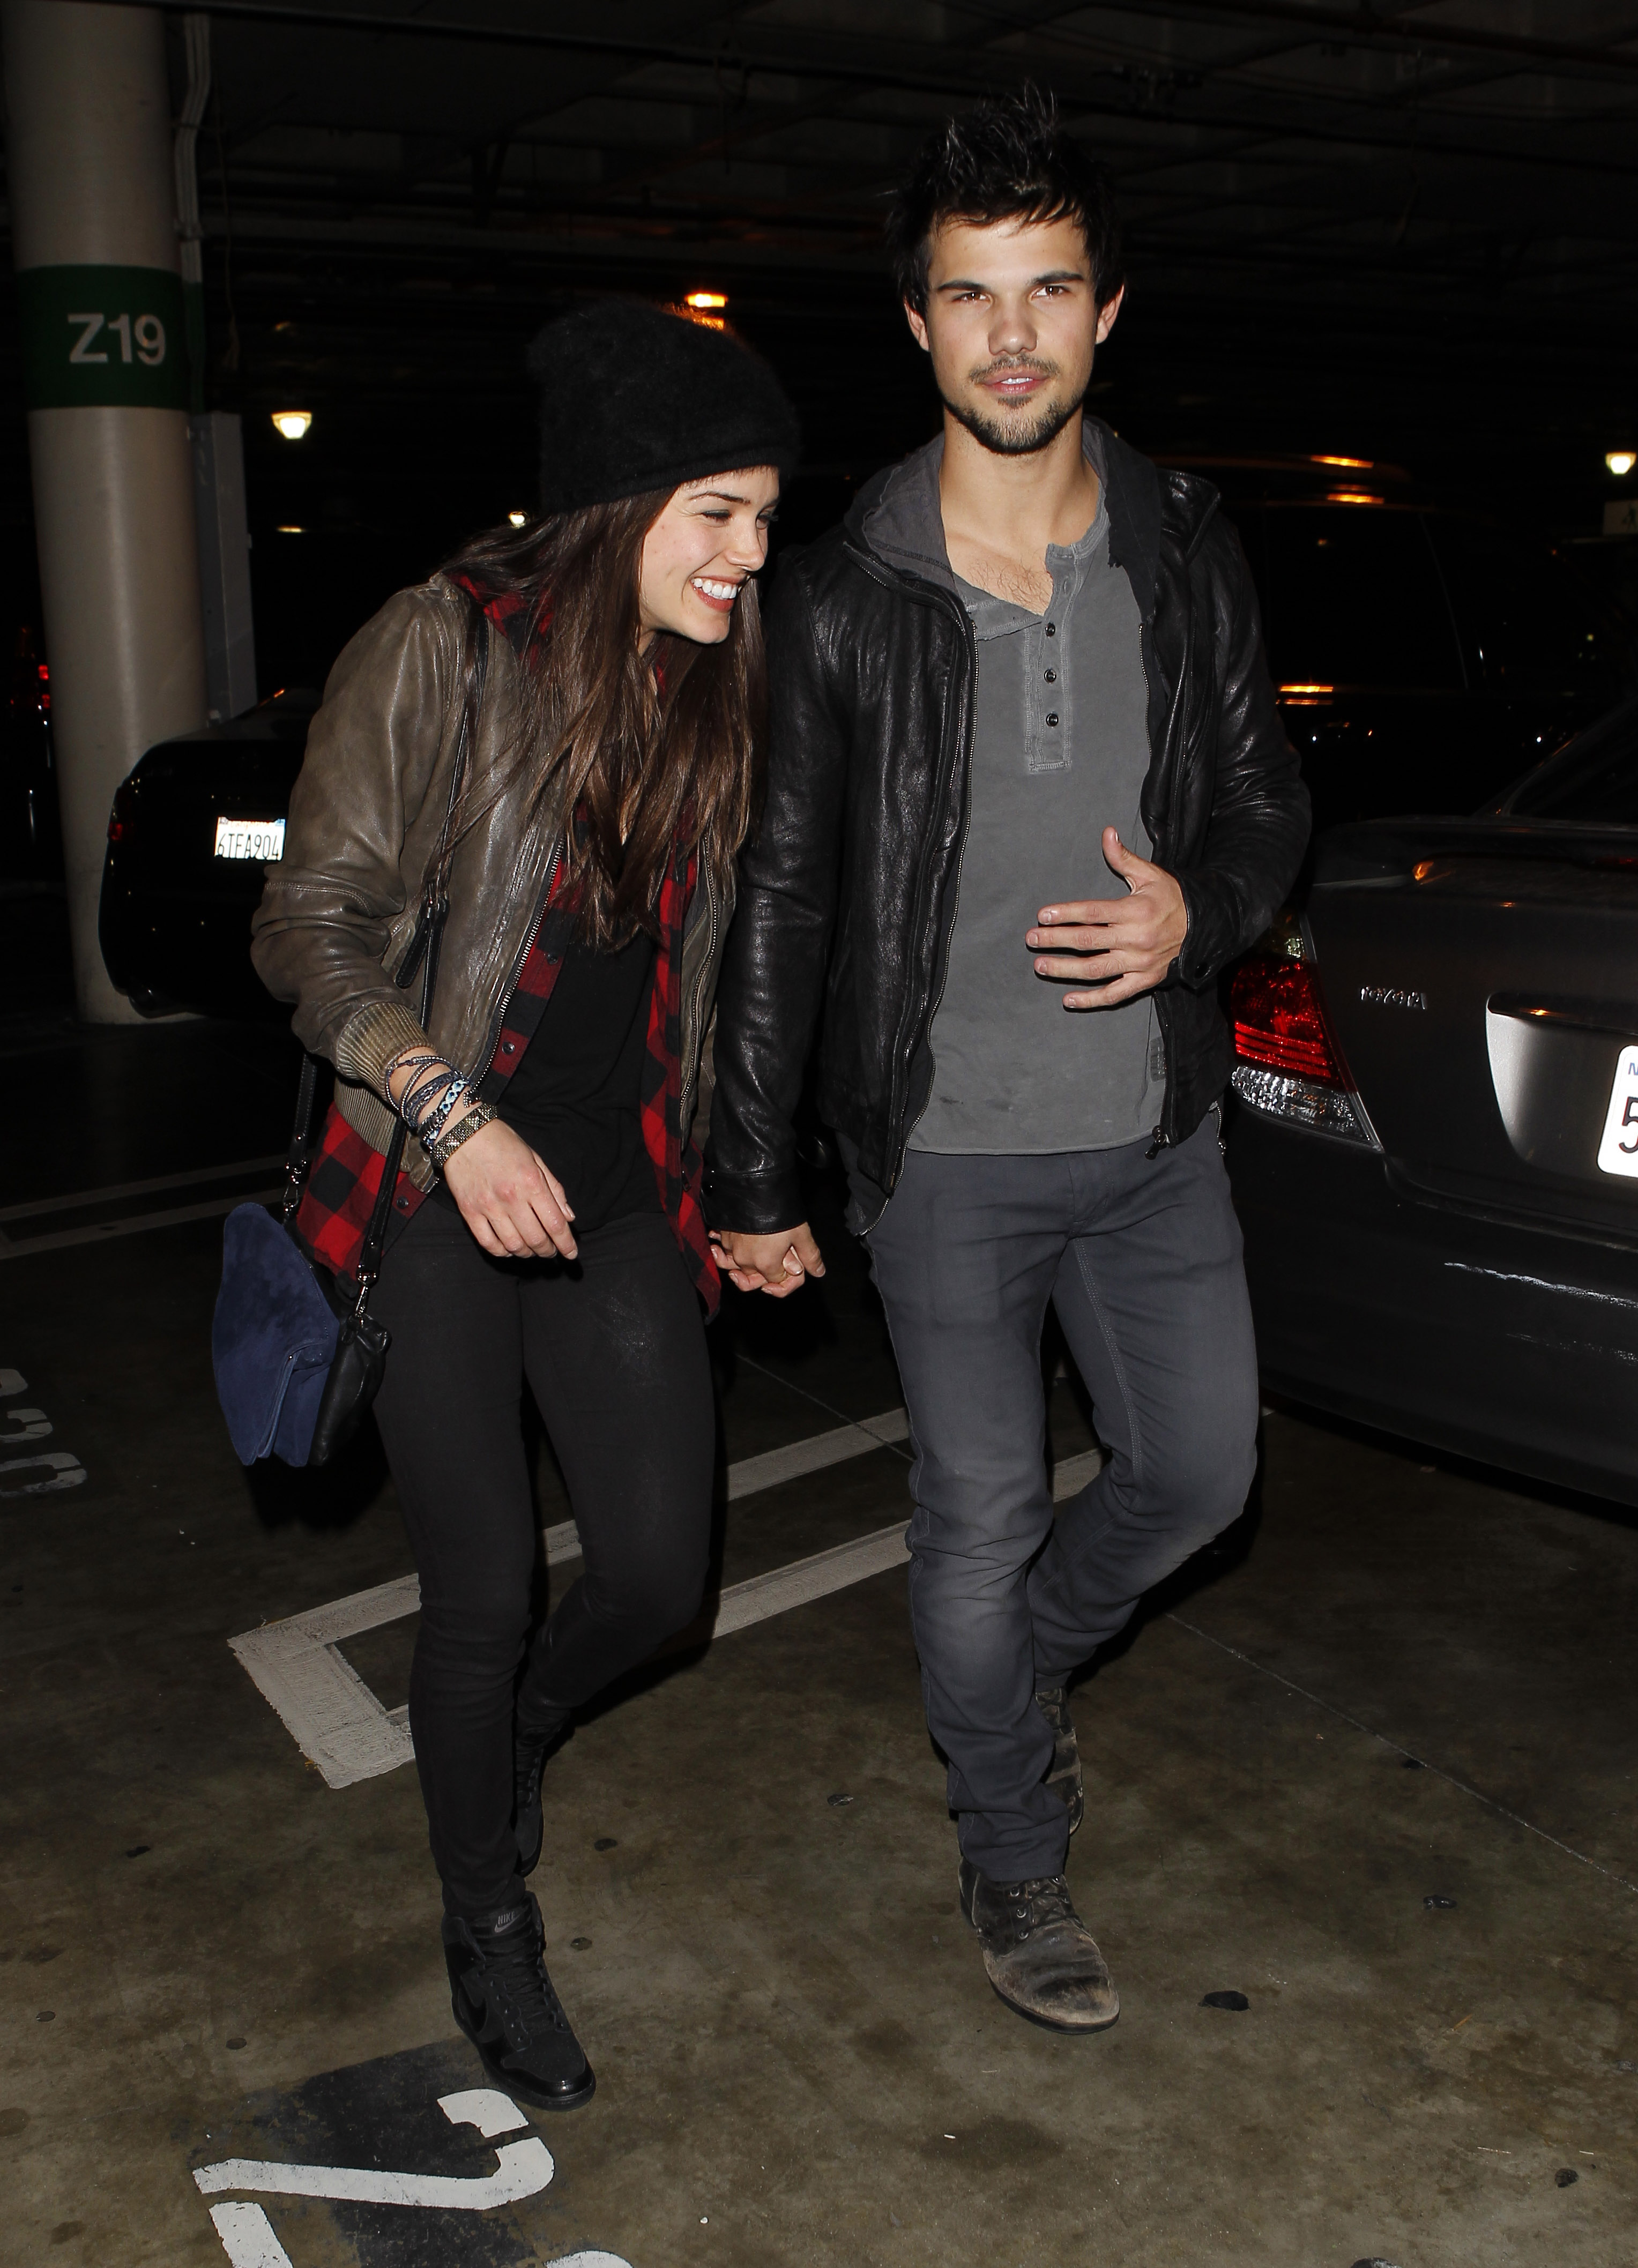 Taylor Lautner and Marie Avgeropoulos on December 9, 2013, in Los Angeles, California. | Source: Getty Images